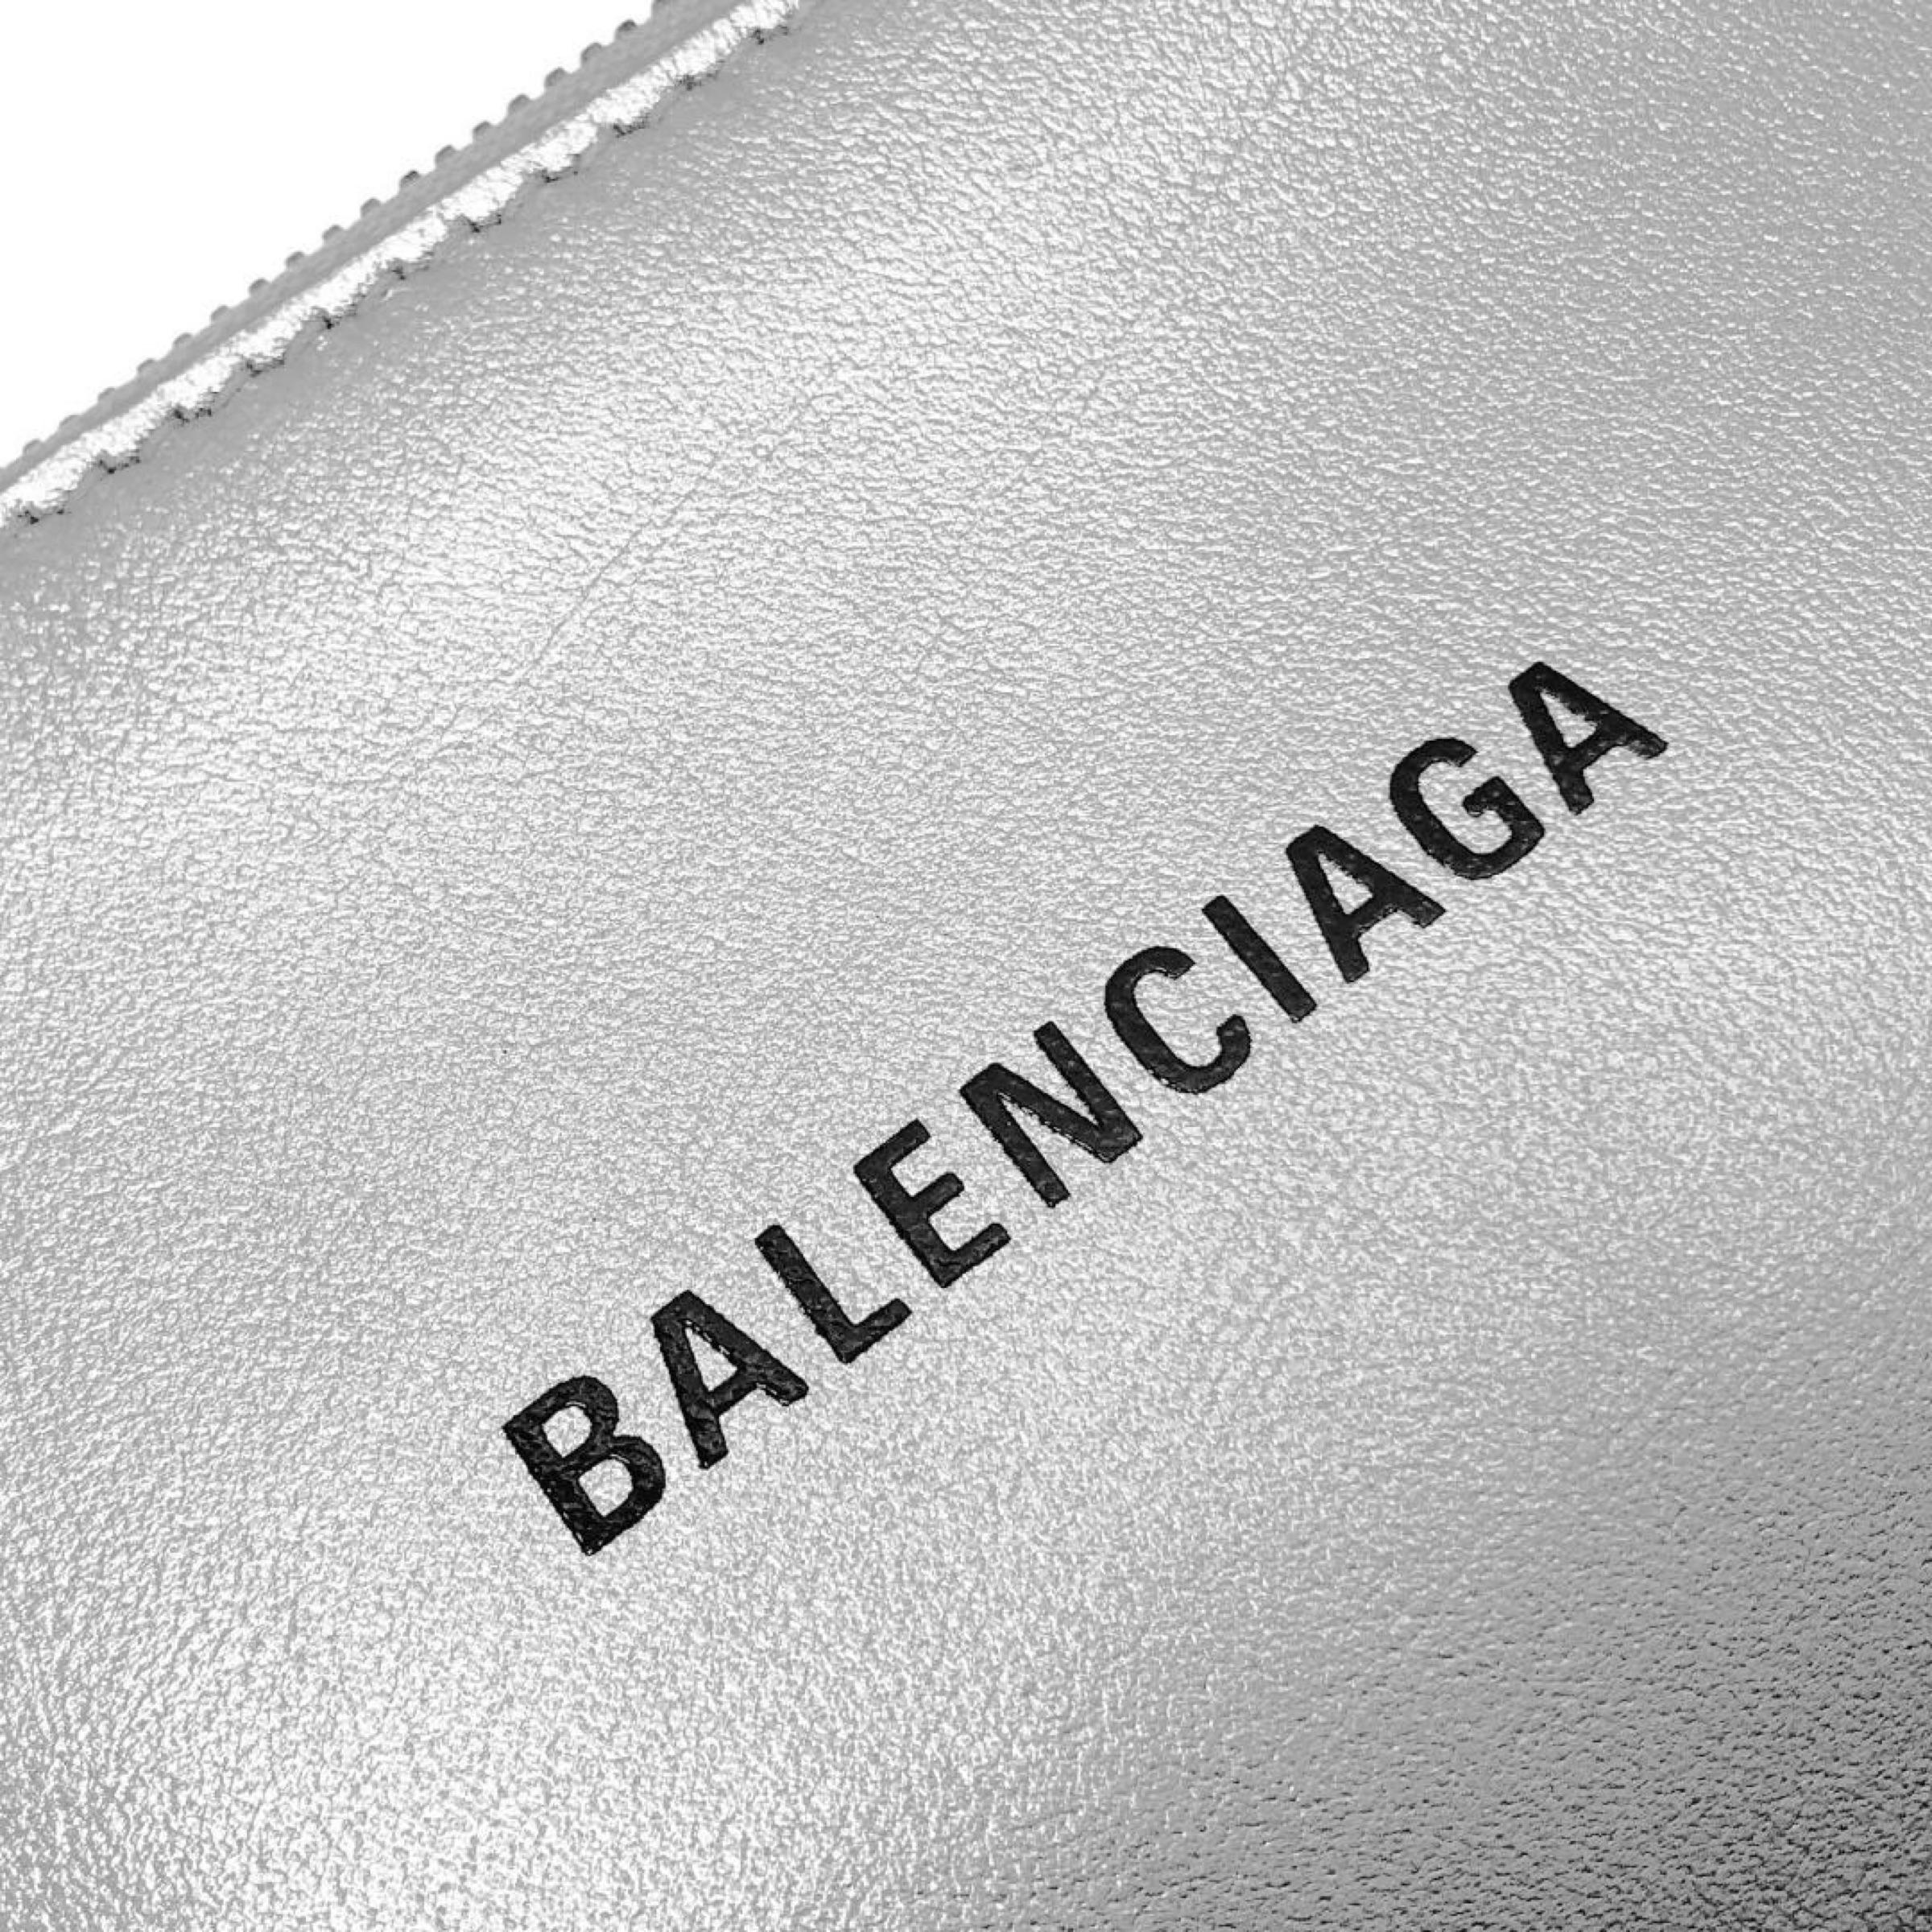 NEW Balenciaga Silver Printed Logo Leather Key Chain Pouch Bag For Sale 7